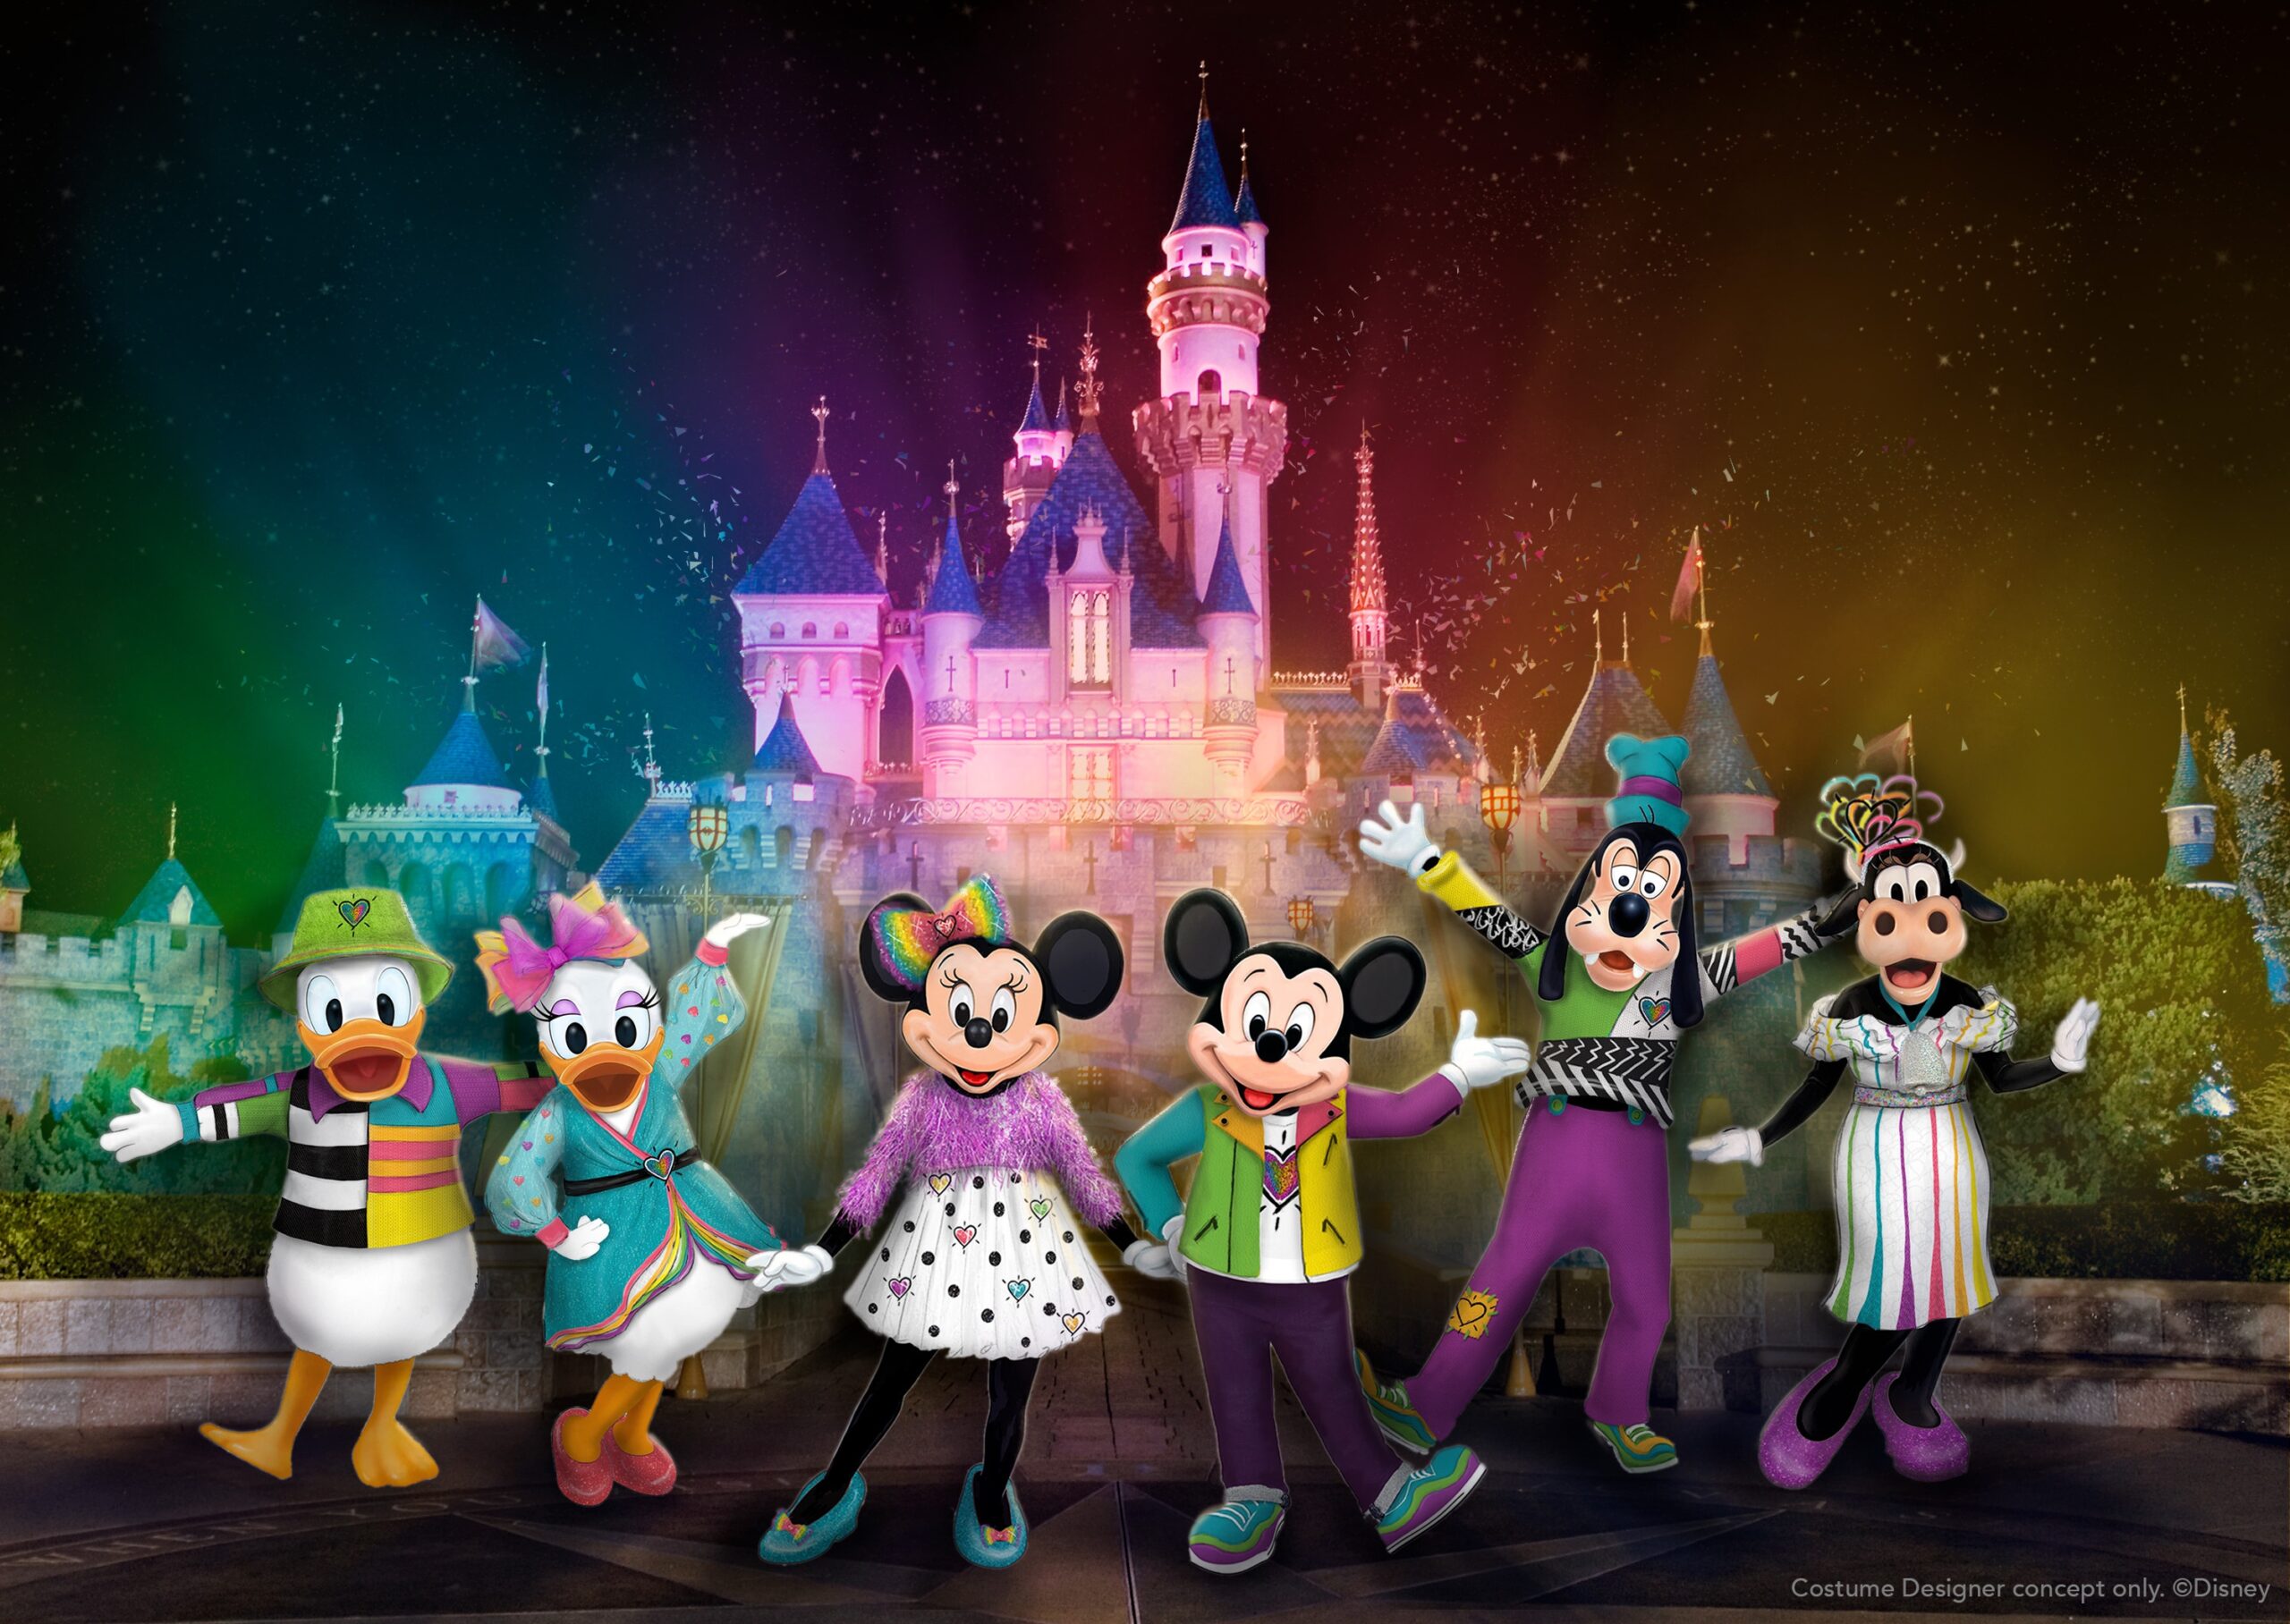 Mickey Mouse, Minnie Mouse, Clarabelle, Donald, Daisy and Goofy will debut new attire for Disneyland After Dark: Pride Nite at the Disneyland Park in Anaheim, California. (Photo Credit: Disneyland Resort)